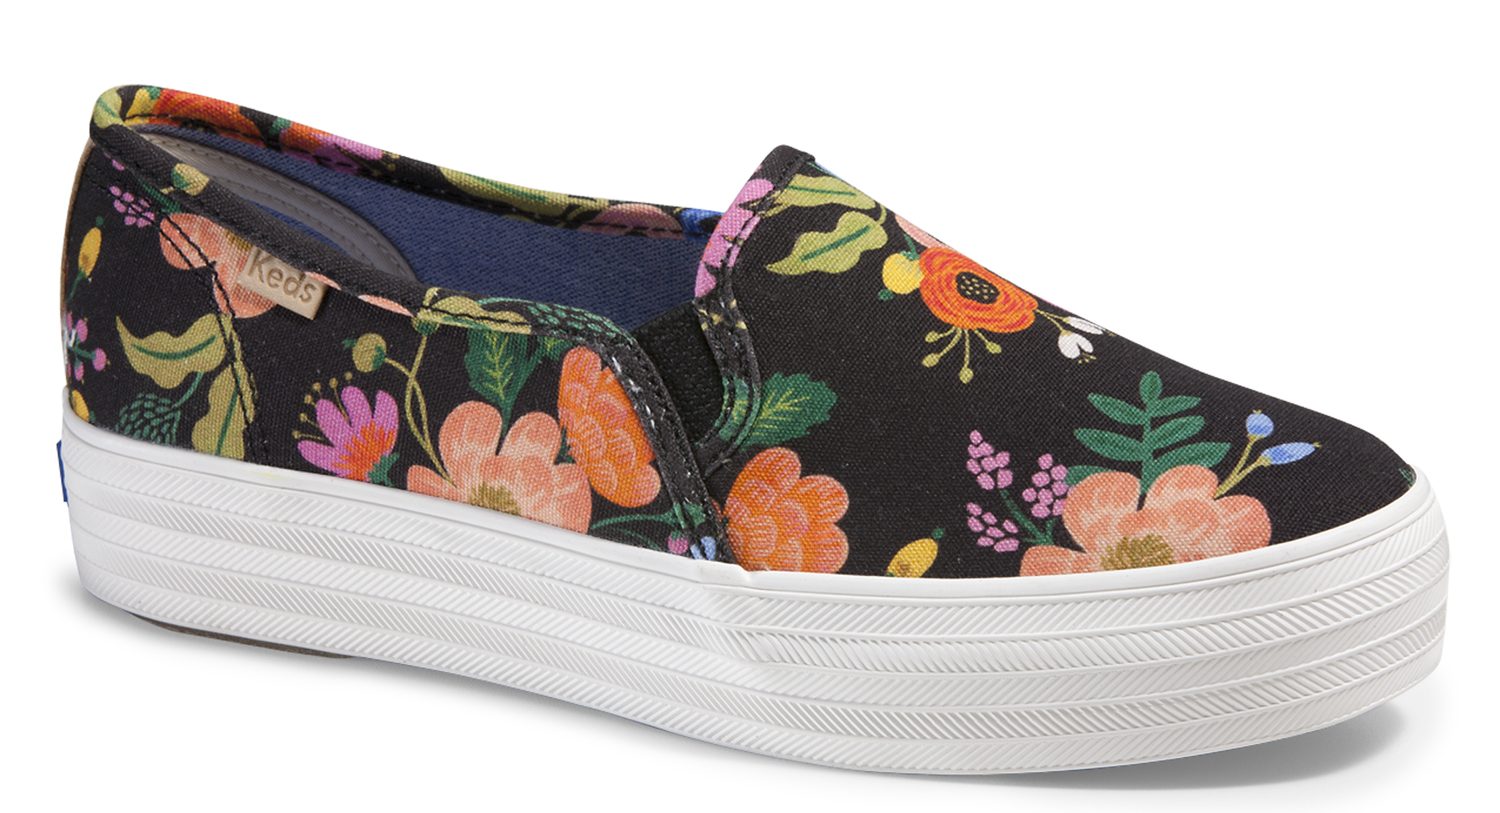 The Keds x Rifle Paper Co. collection is the go-to shoes for summer in ...